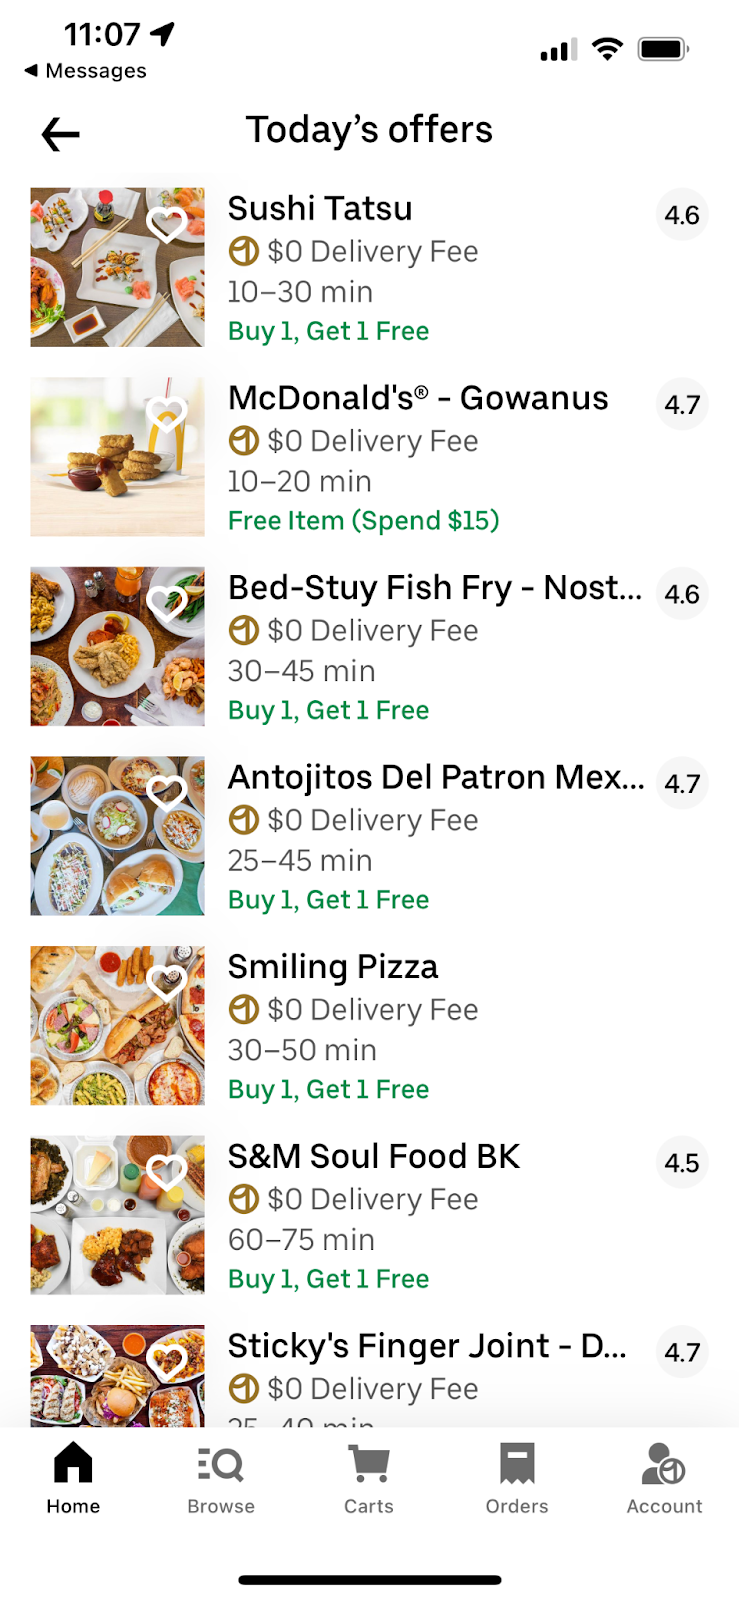 Screen shot from Uber app showing restaurants with $0 delivery fee